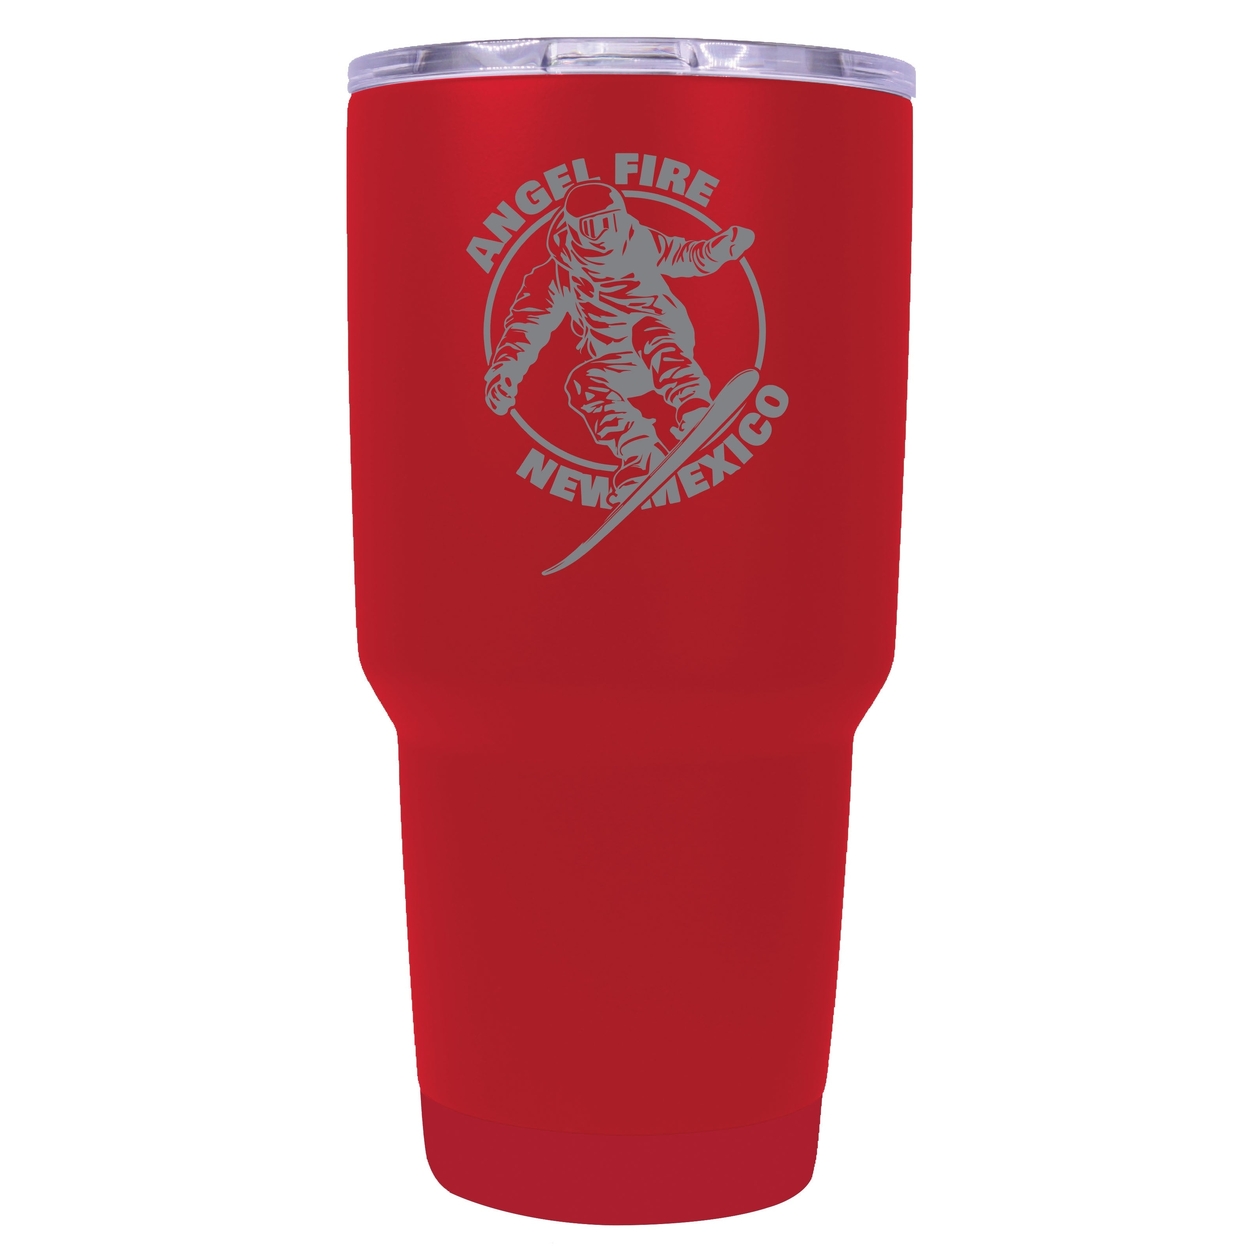 Angel Fire New Mexico Souvenir 24 Oz Engraved Insulated Stainless Steel Tumbler - Red,,Single Unit